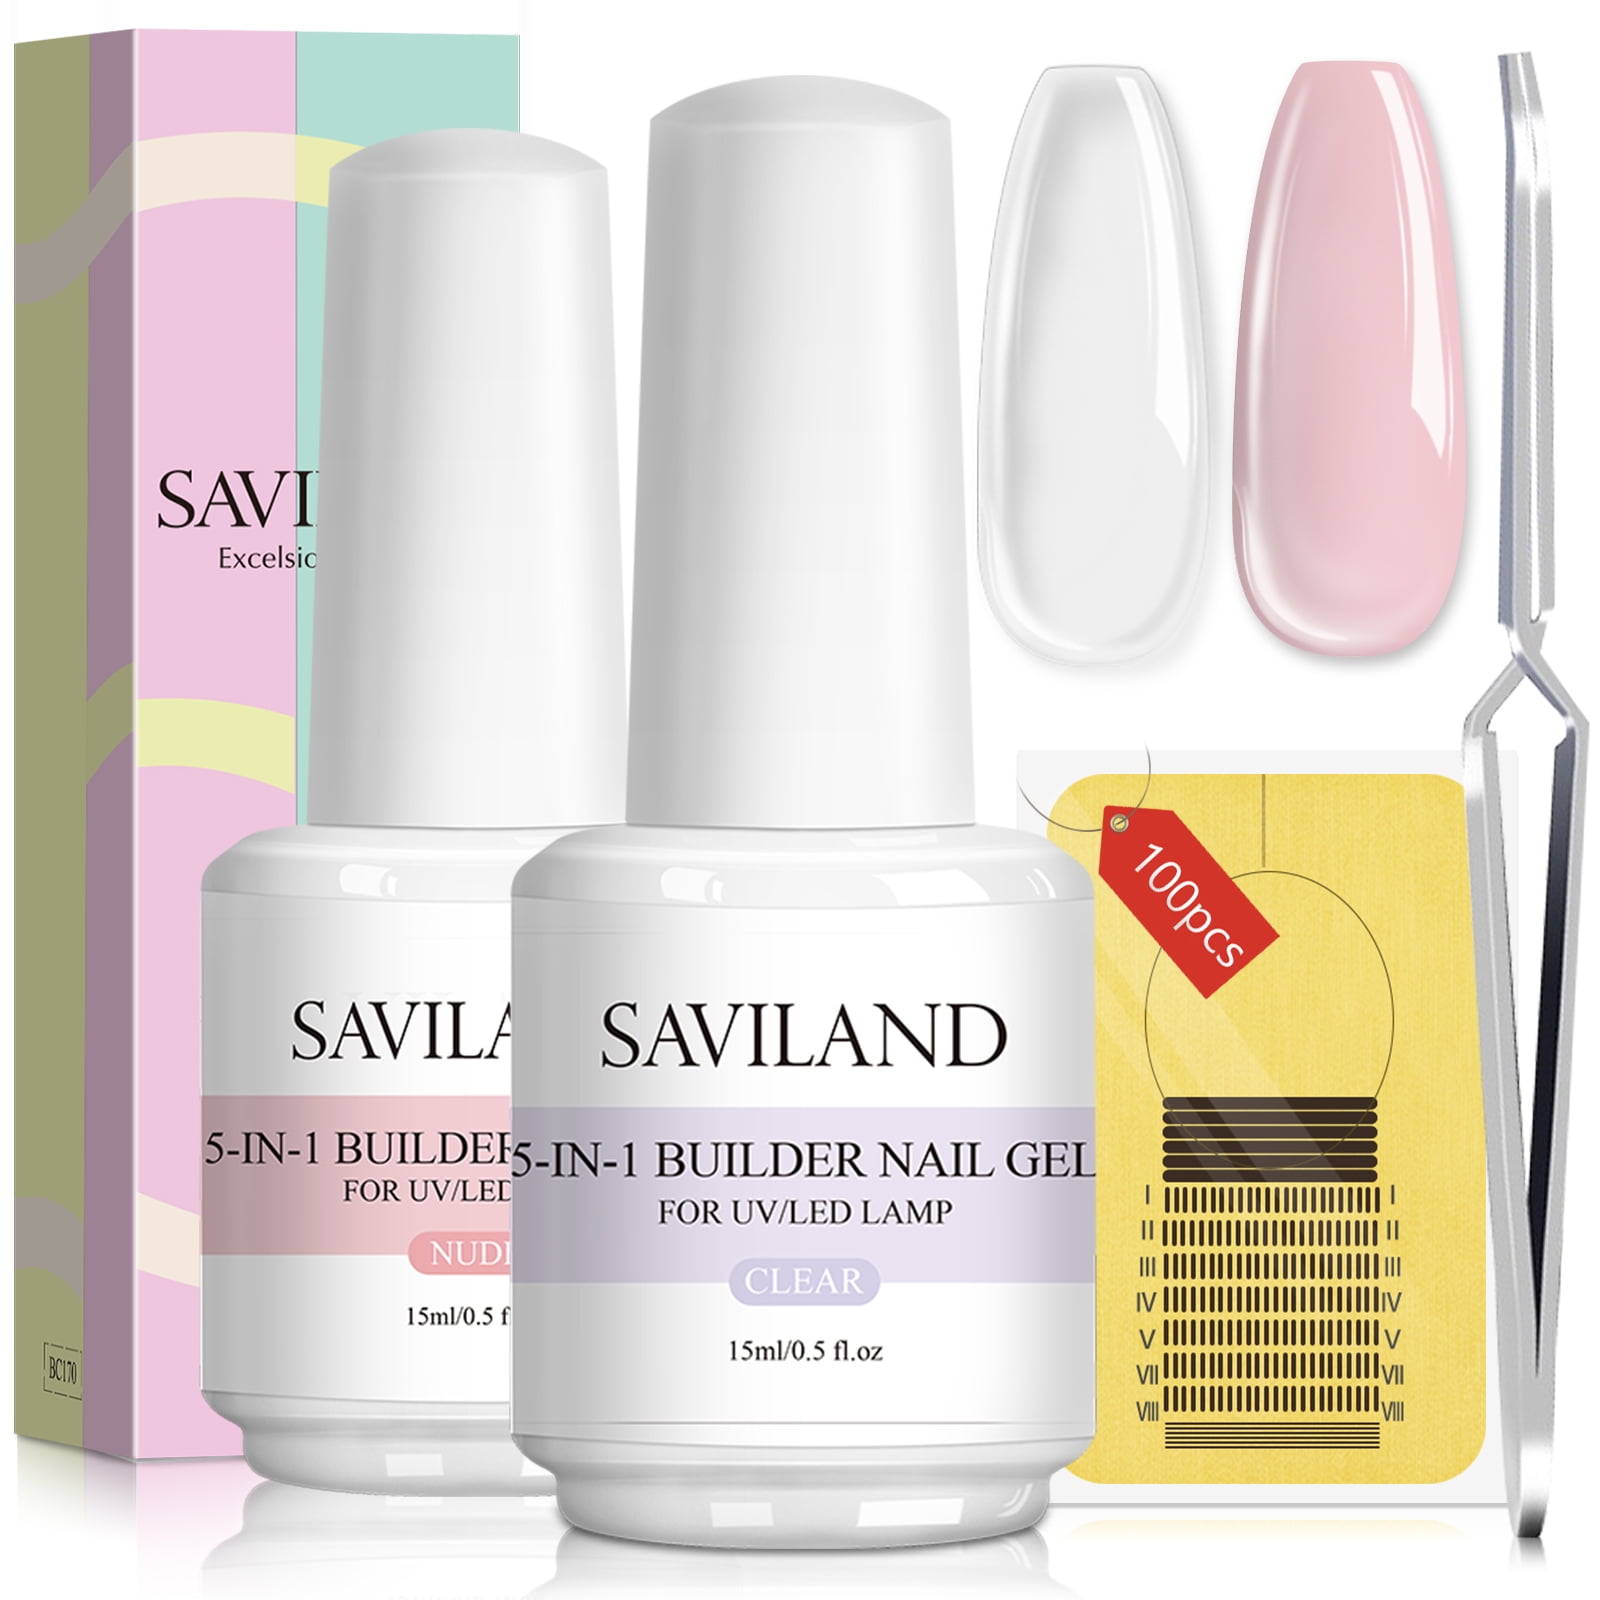 Saviland Clear Builder Nail Gel - 5-in-1 UV Harden Gel Nail Polish Kit for  Nail Extension with 100pcs Nail Forms Clearance 